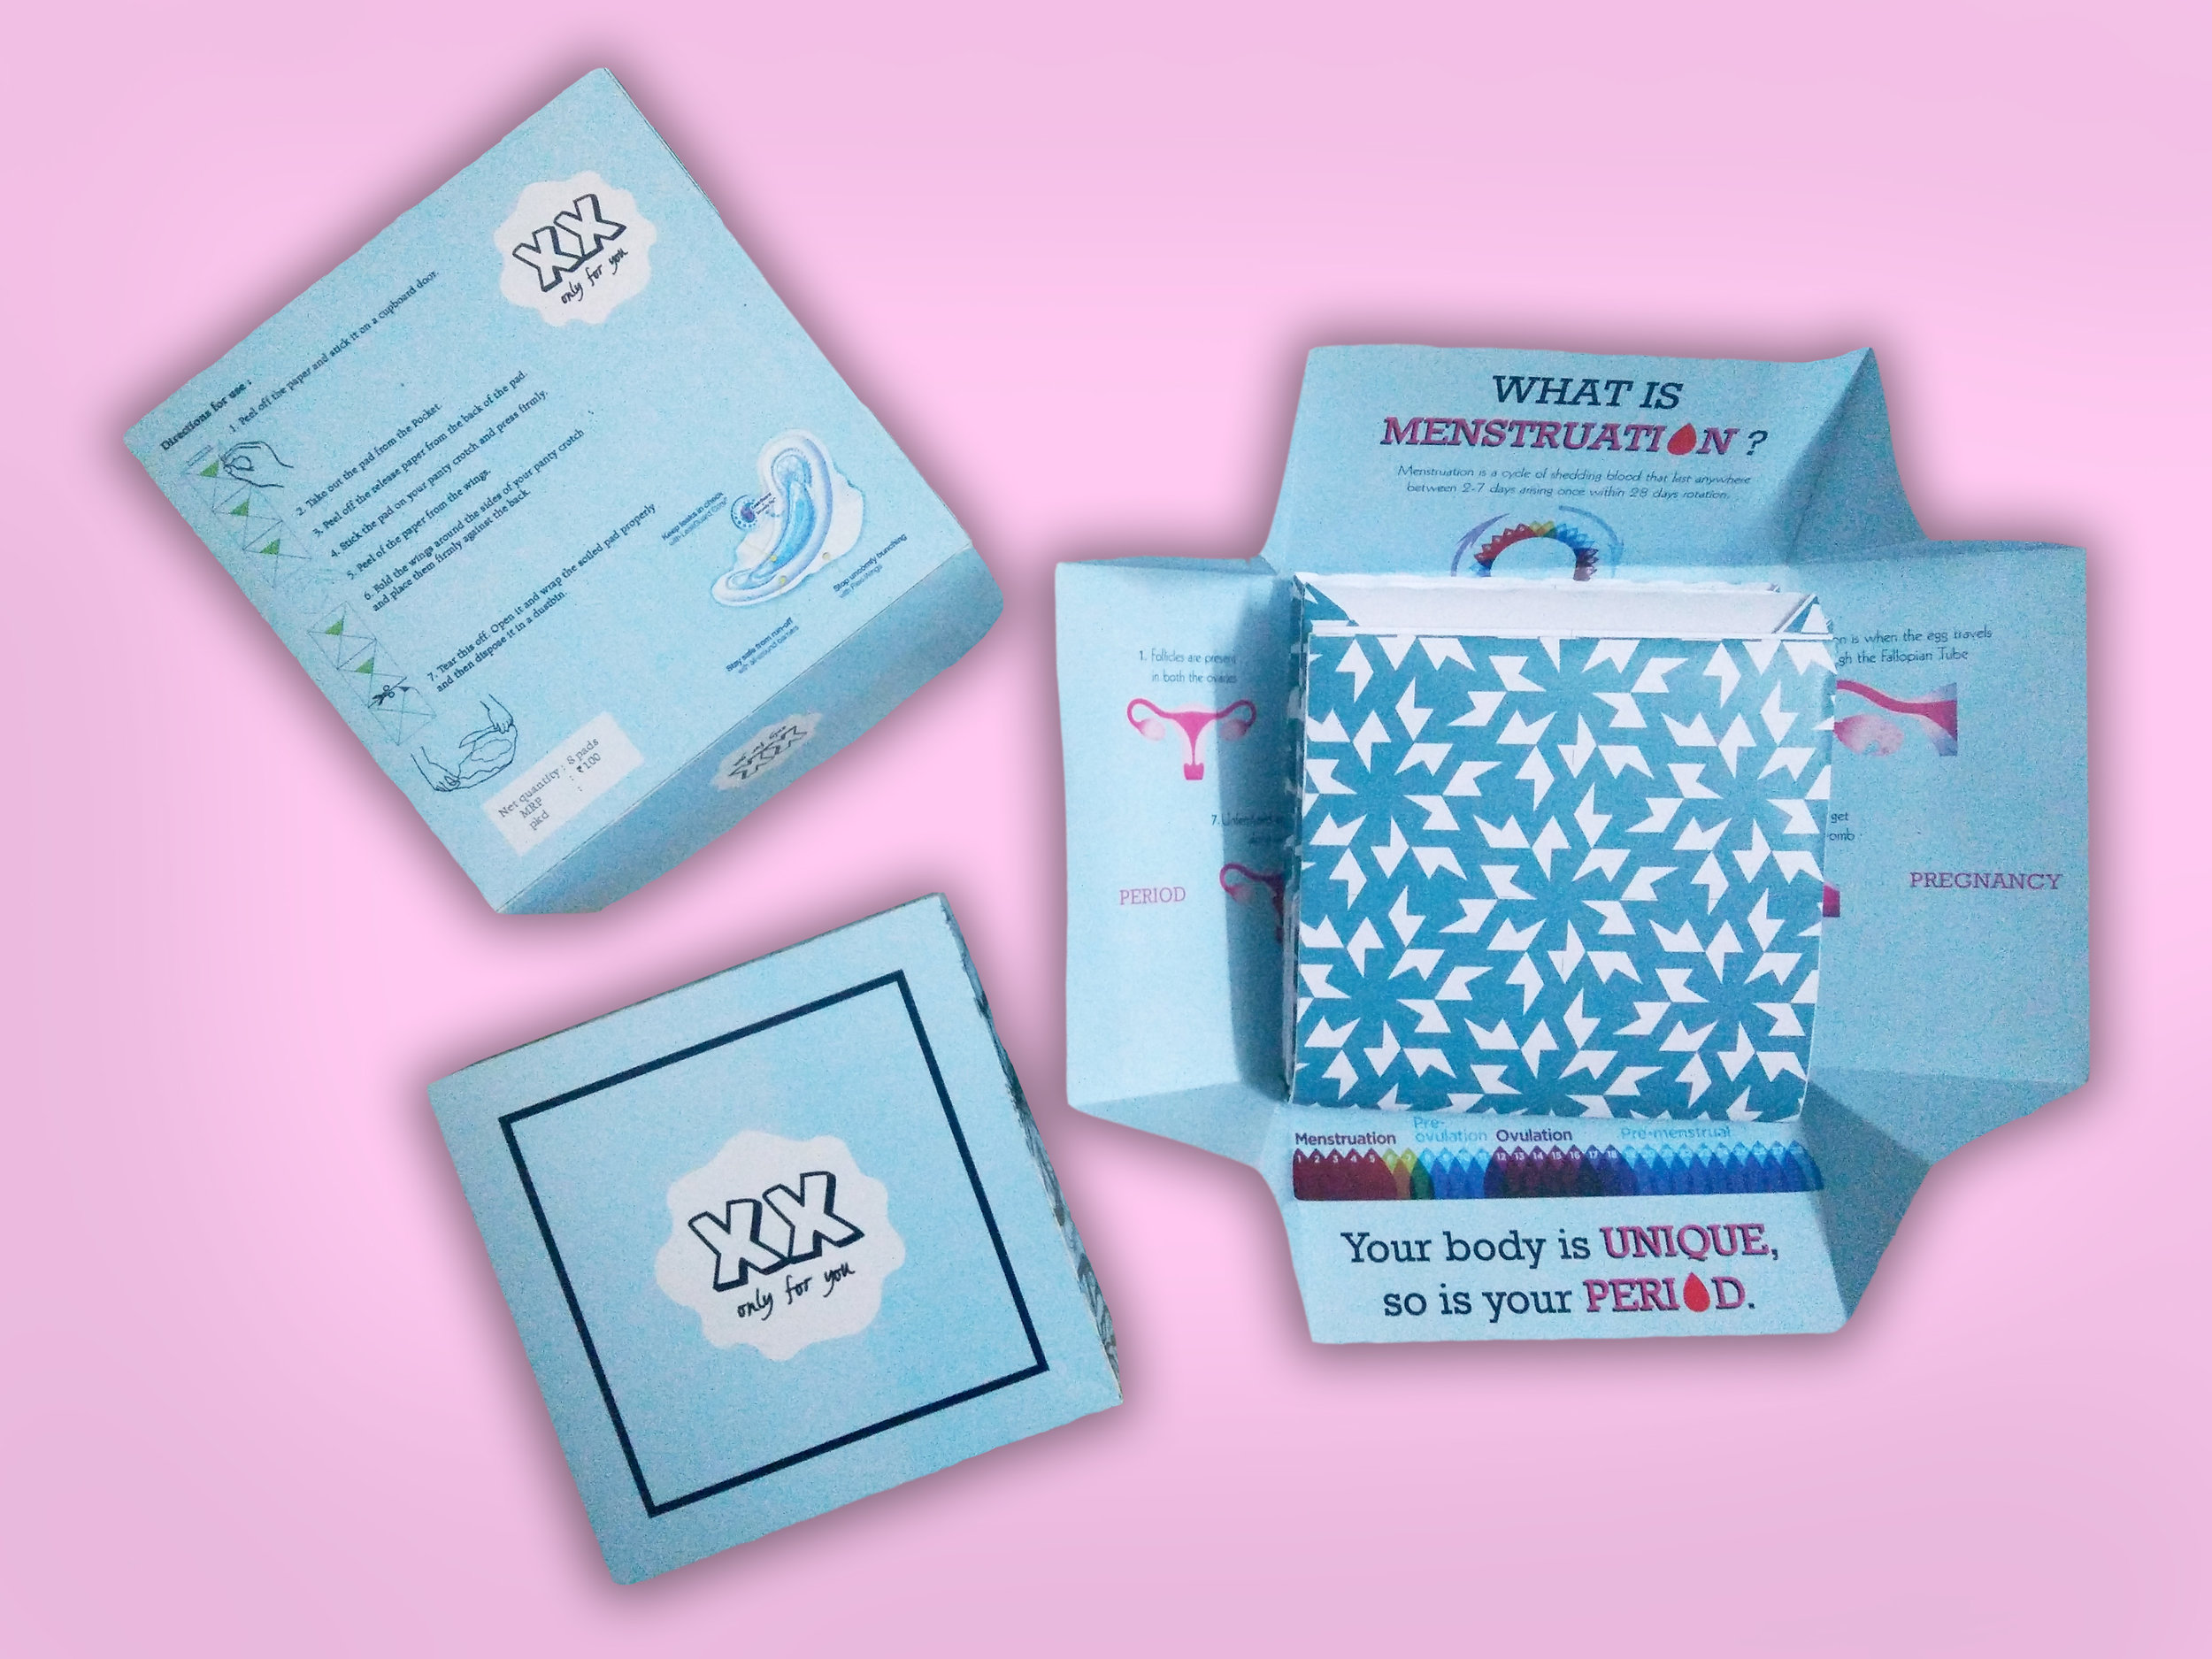 Sanitary Hygiene Products and Packaging Design from India